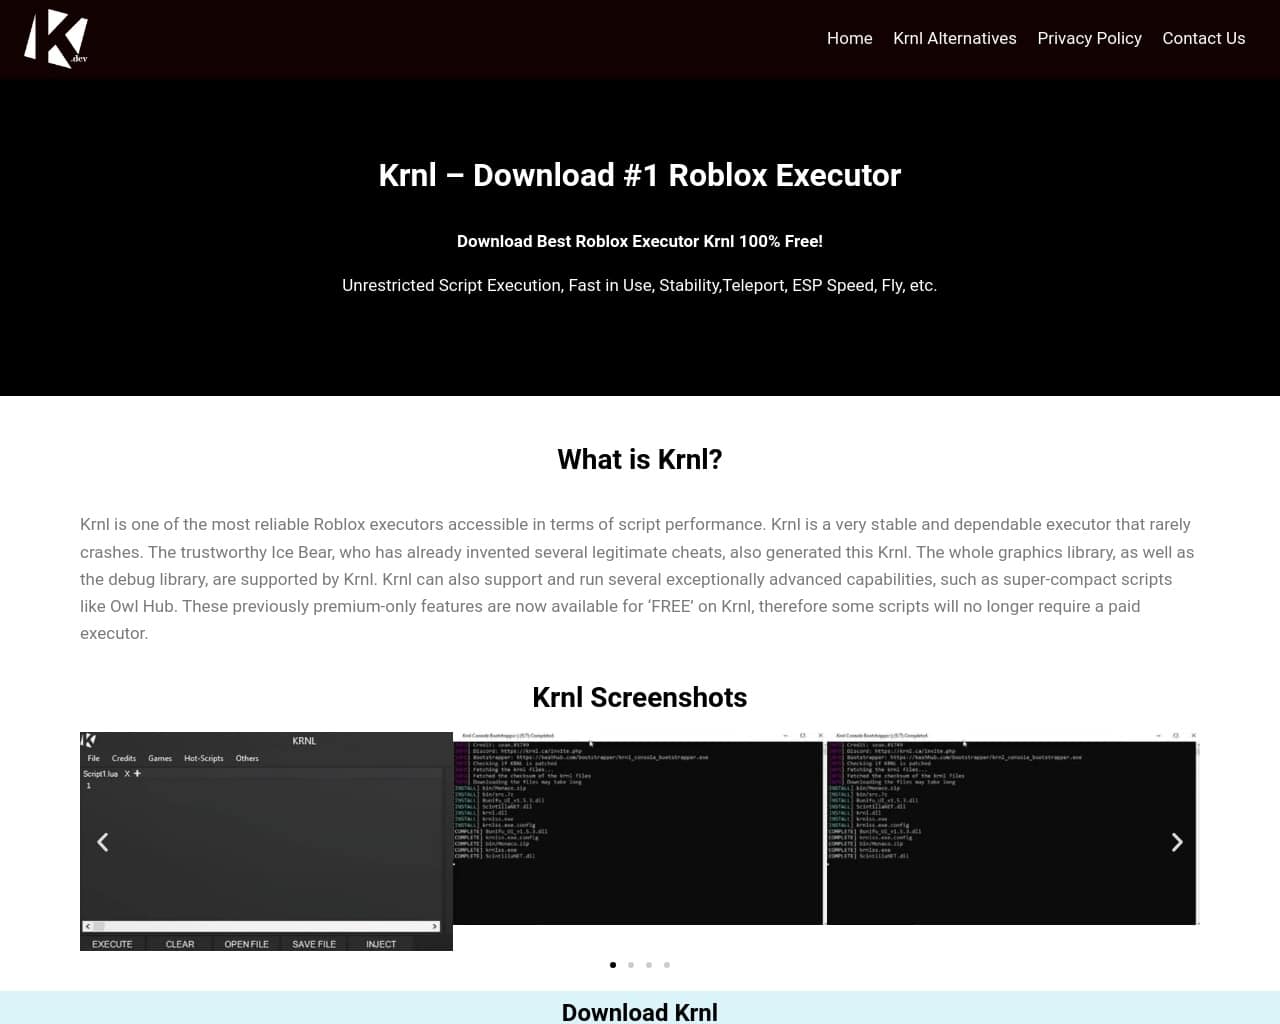 How to Download and Use Best Roblox Executor, ROBLOX EXPLOIT